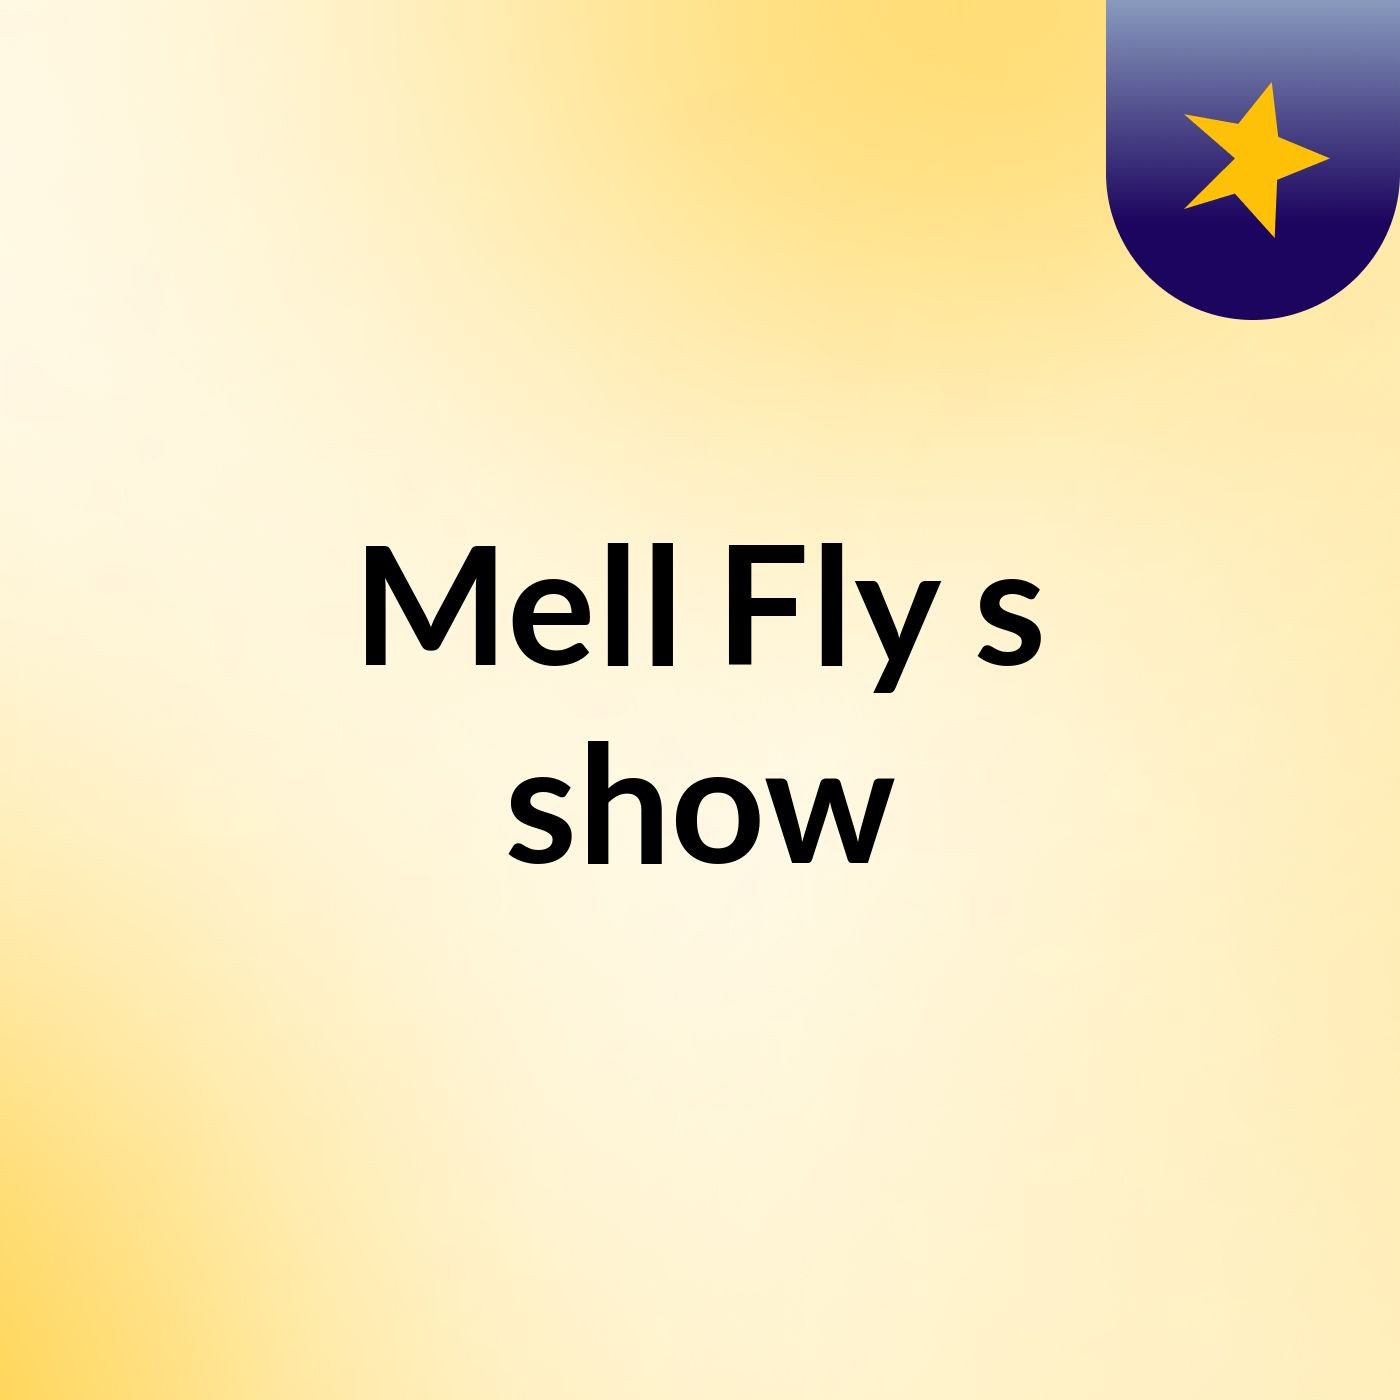 Mell Fly's show